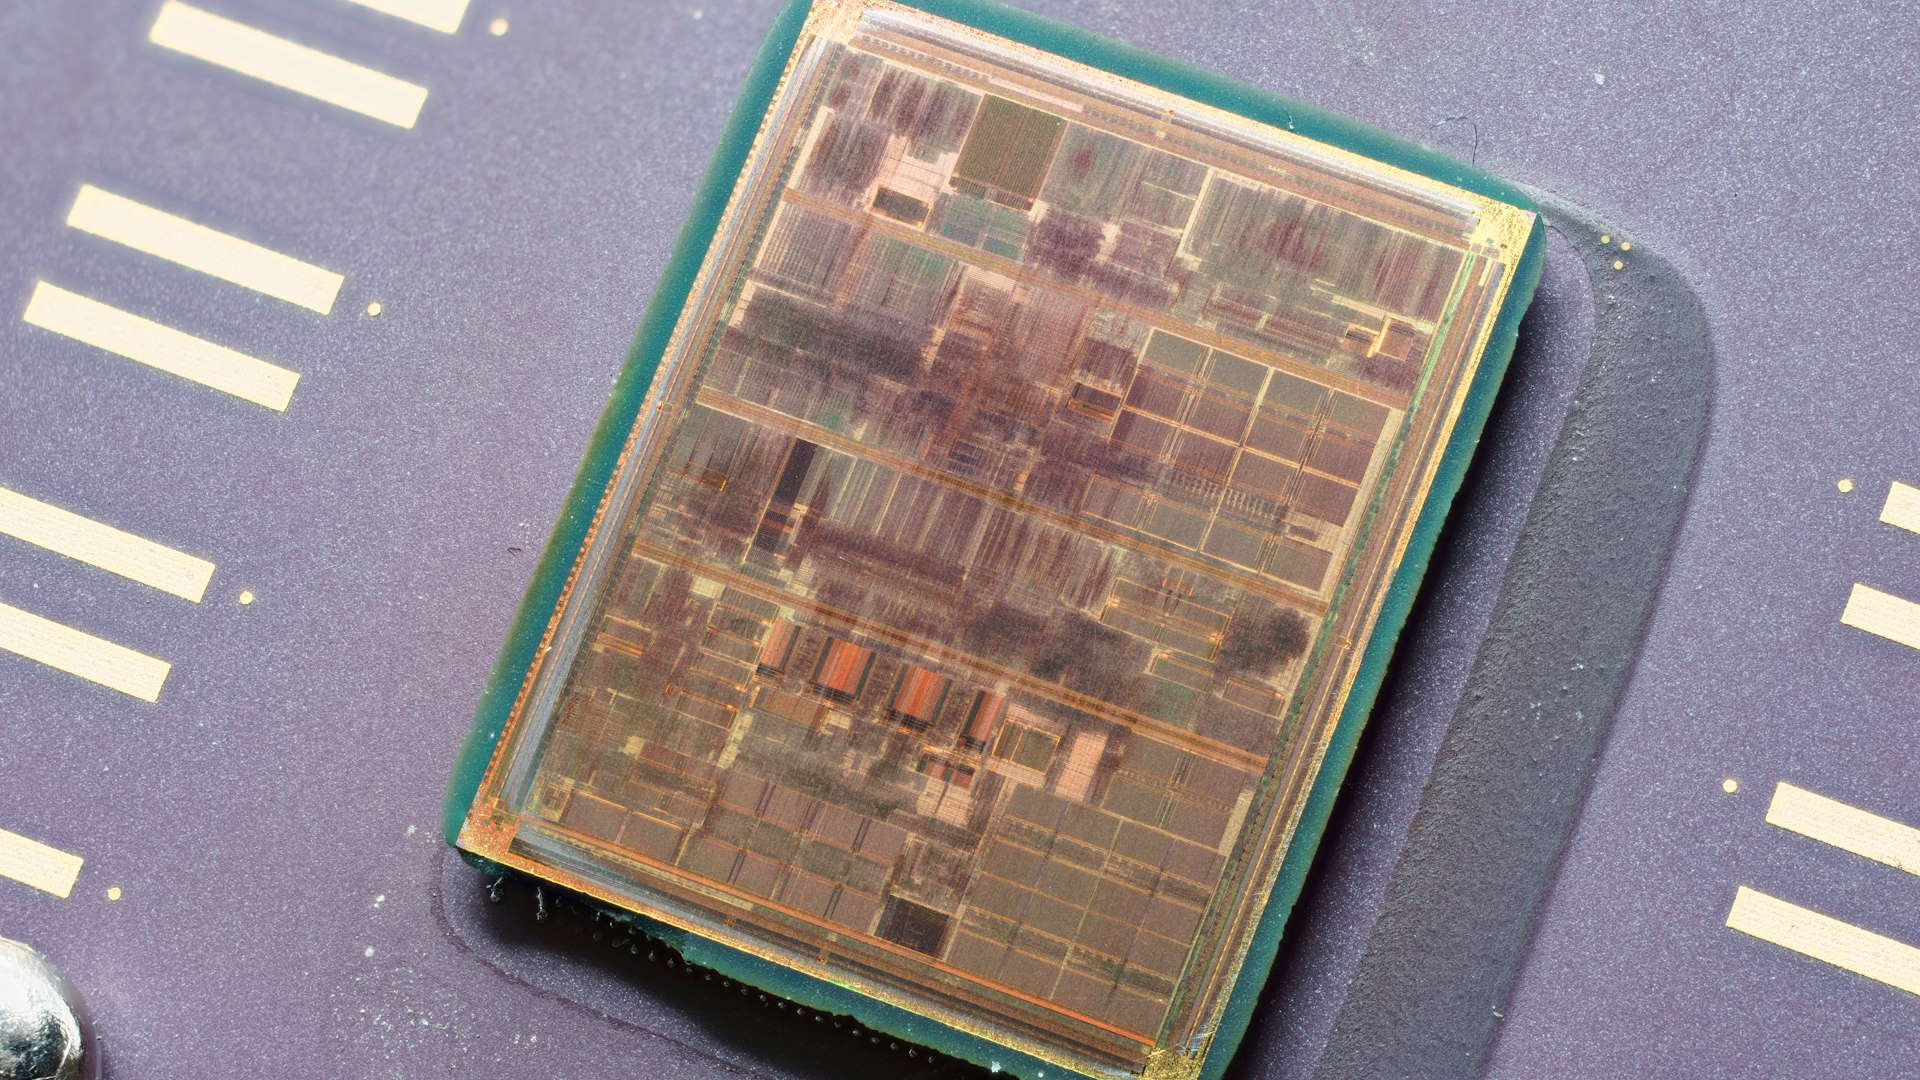  An old AMD Athlon K7 Easter egg has a revolver and map of Texas etched onto the chip. They don't make em like that anymore, eh? 